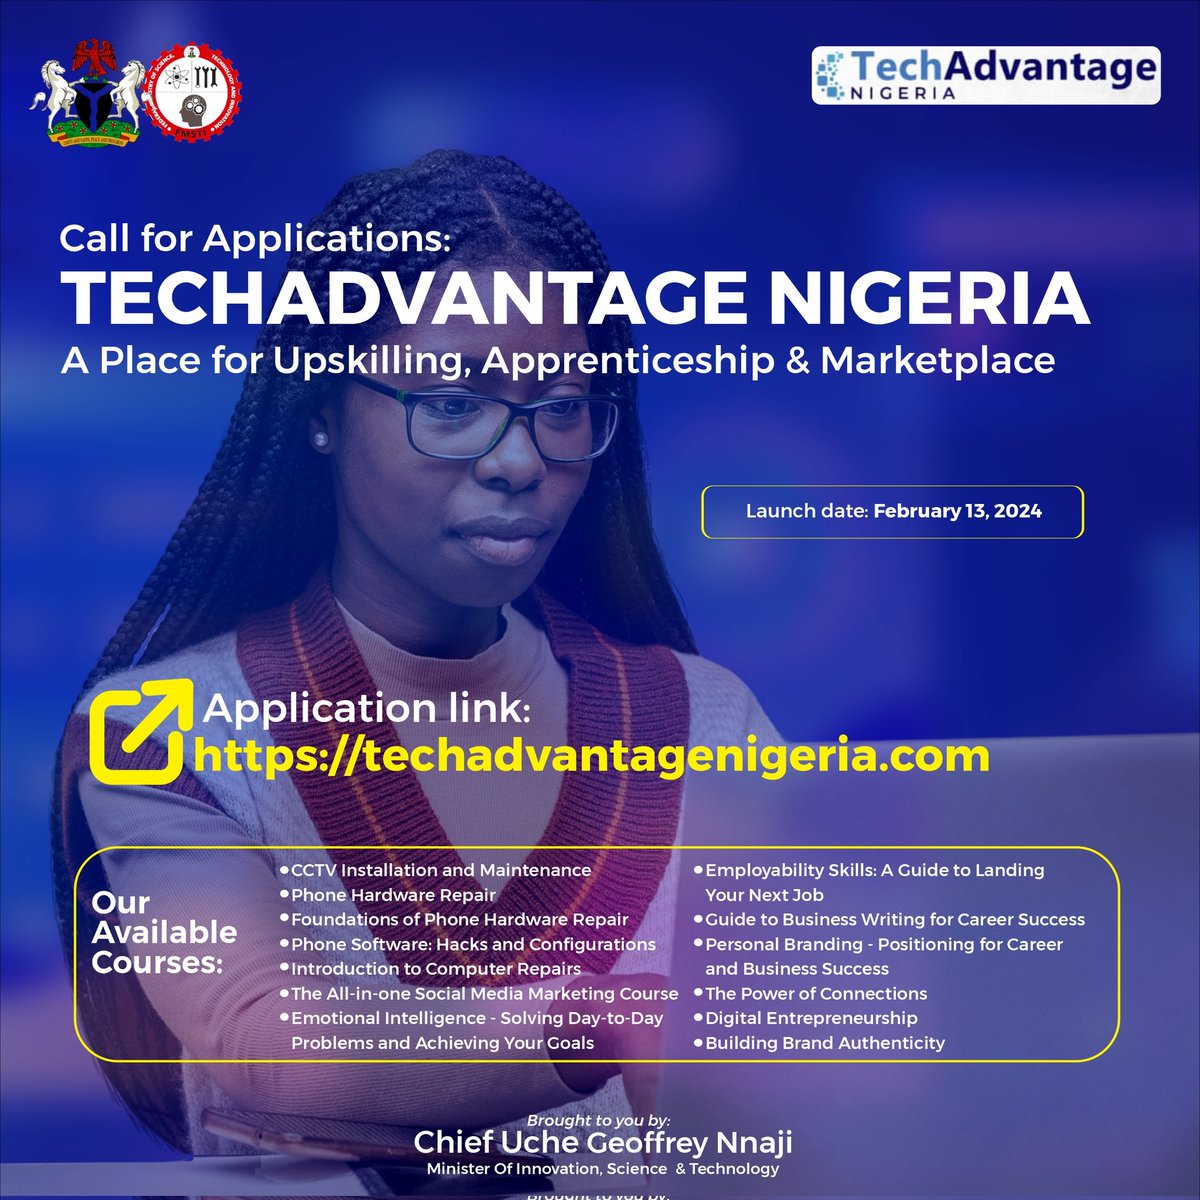 #ICYMI
The Tech Advantage Nigeria platform was launched and opened to teeming Nigerians who desired to upskill themselves in various tech skills. With local trainers and experts available to train. We adopted the apprenticeship model with this platform.

techadvantagenigeria.com